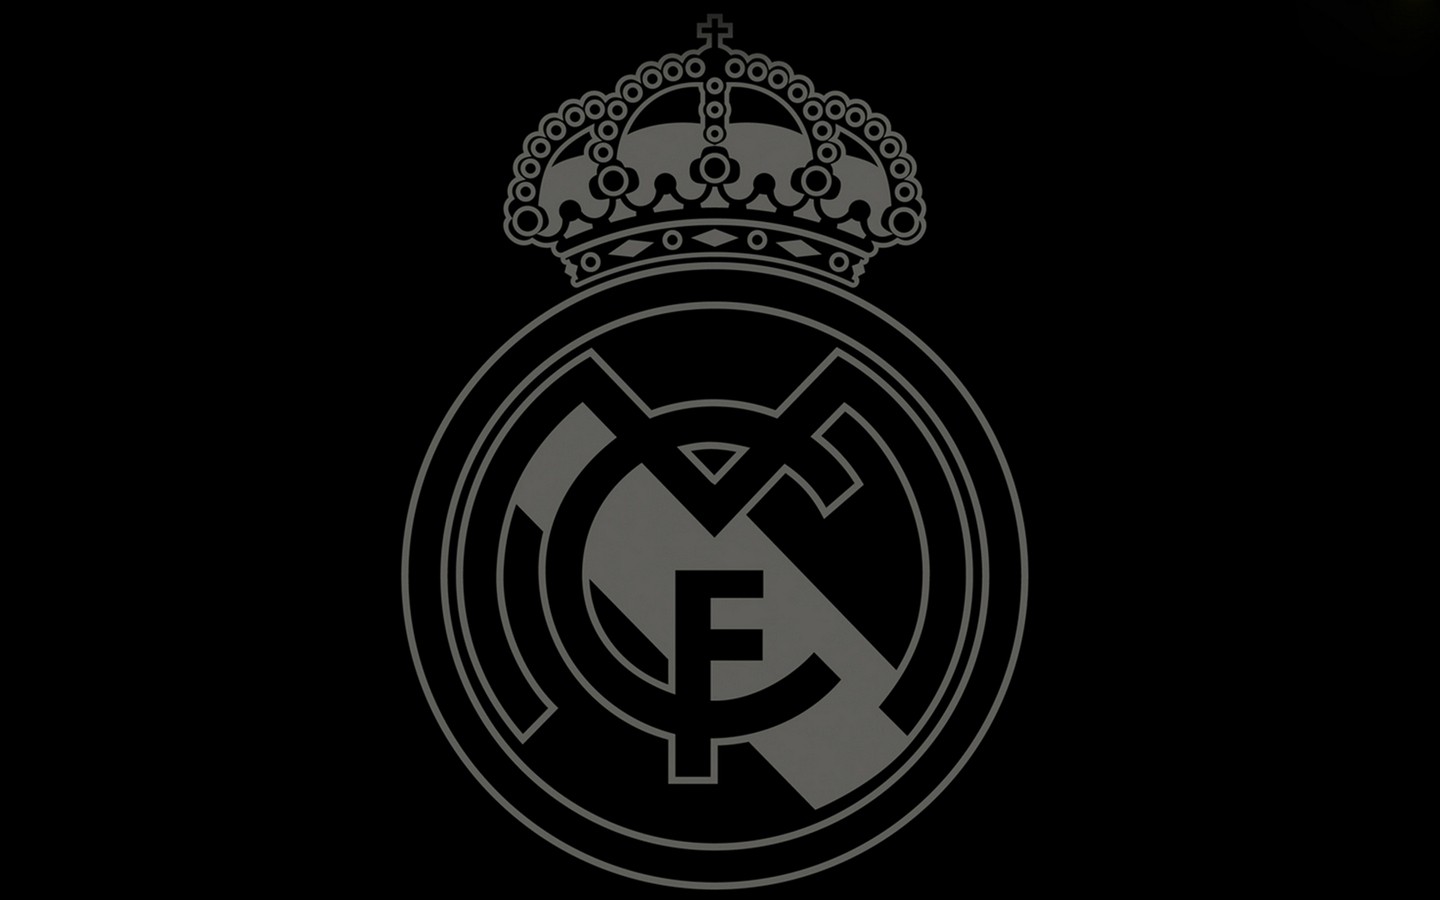 General 1440x900 Real Madrid logo monochrome soccer clubs simple background sport soccer